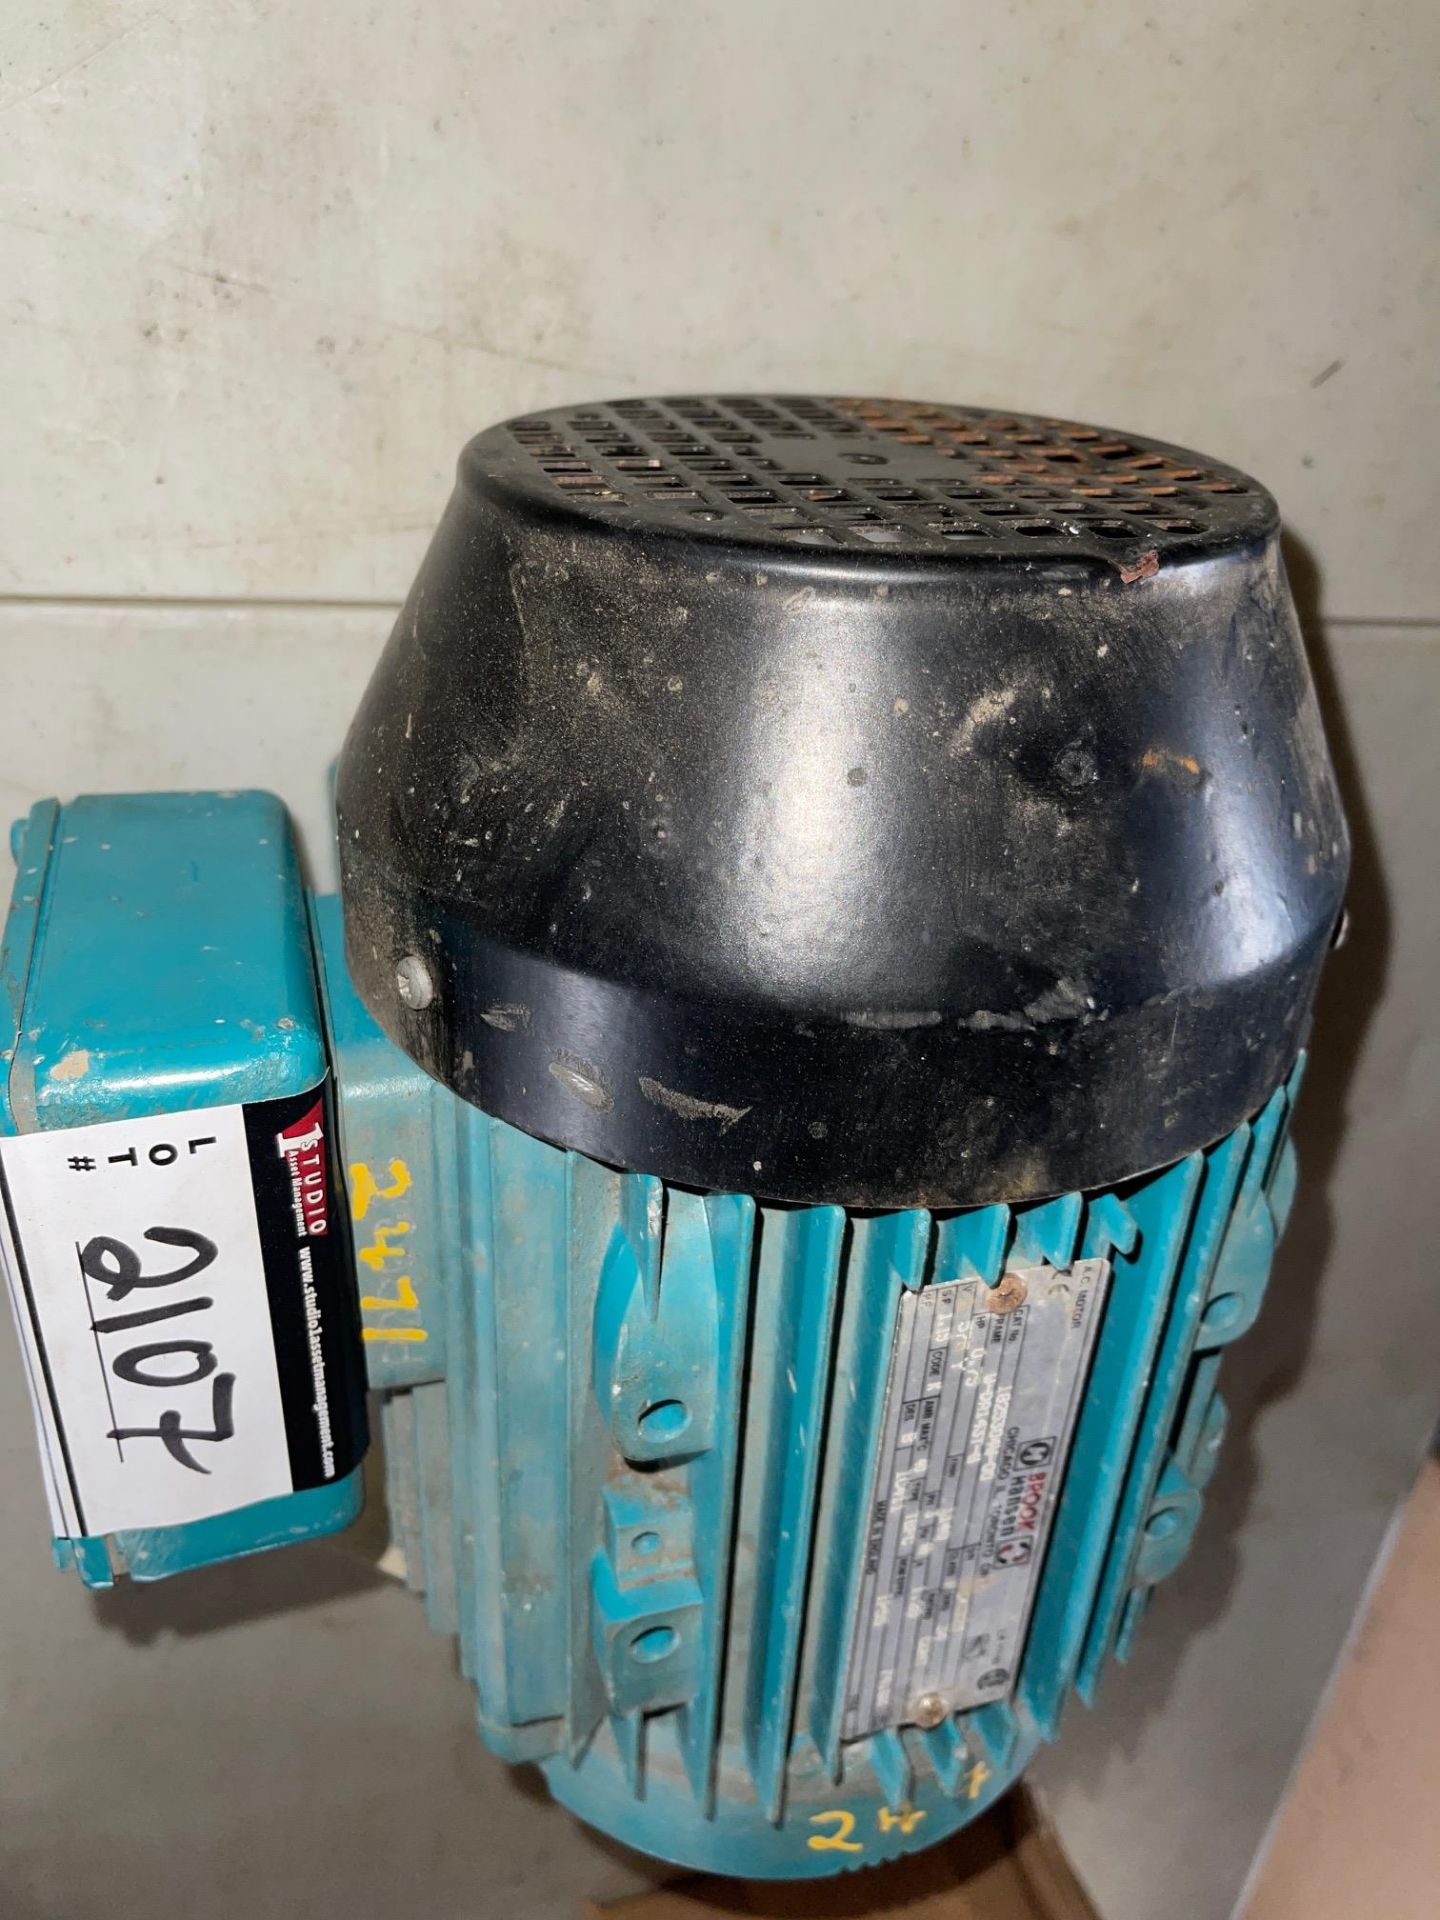 BROOK NAMSEN ELECTRIC MOTOR, 75 HP, 1150 RPM, 575 VOLTS, RIGGING FEE $ - Image 2 of 3